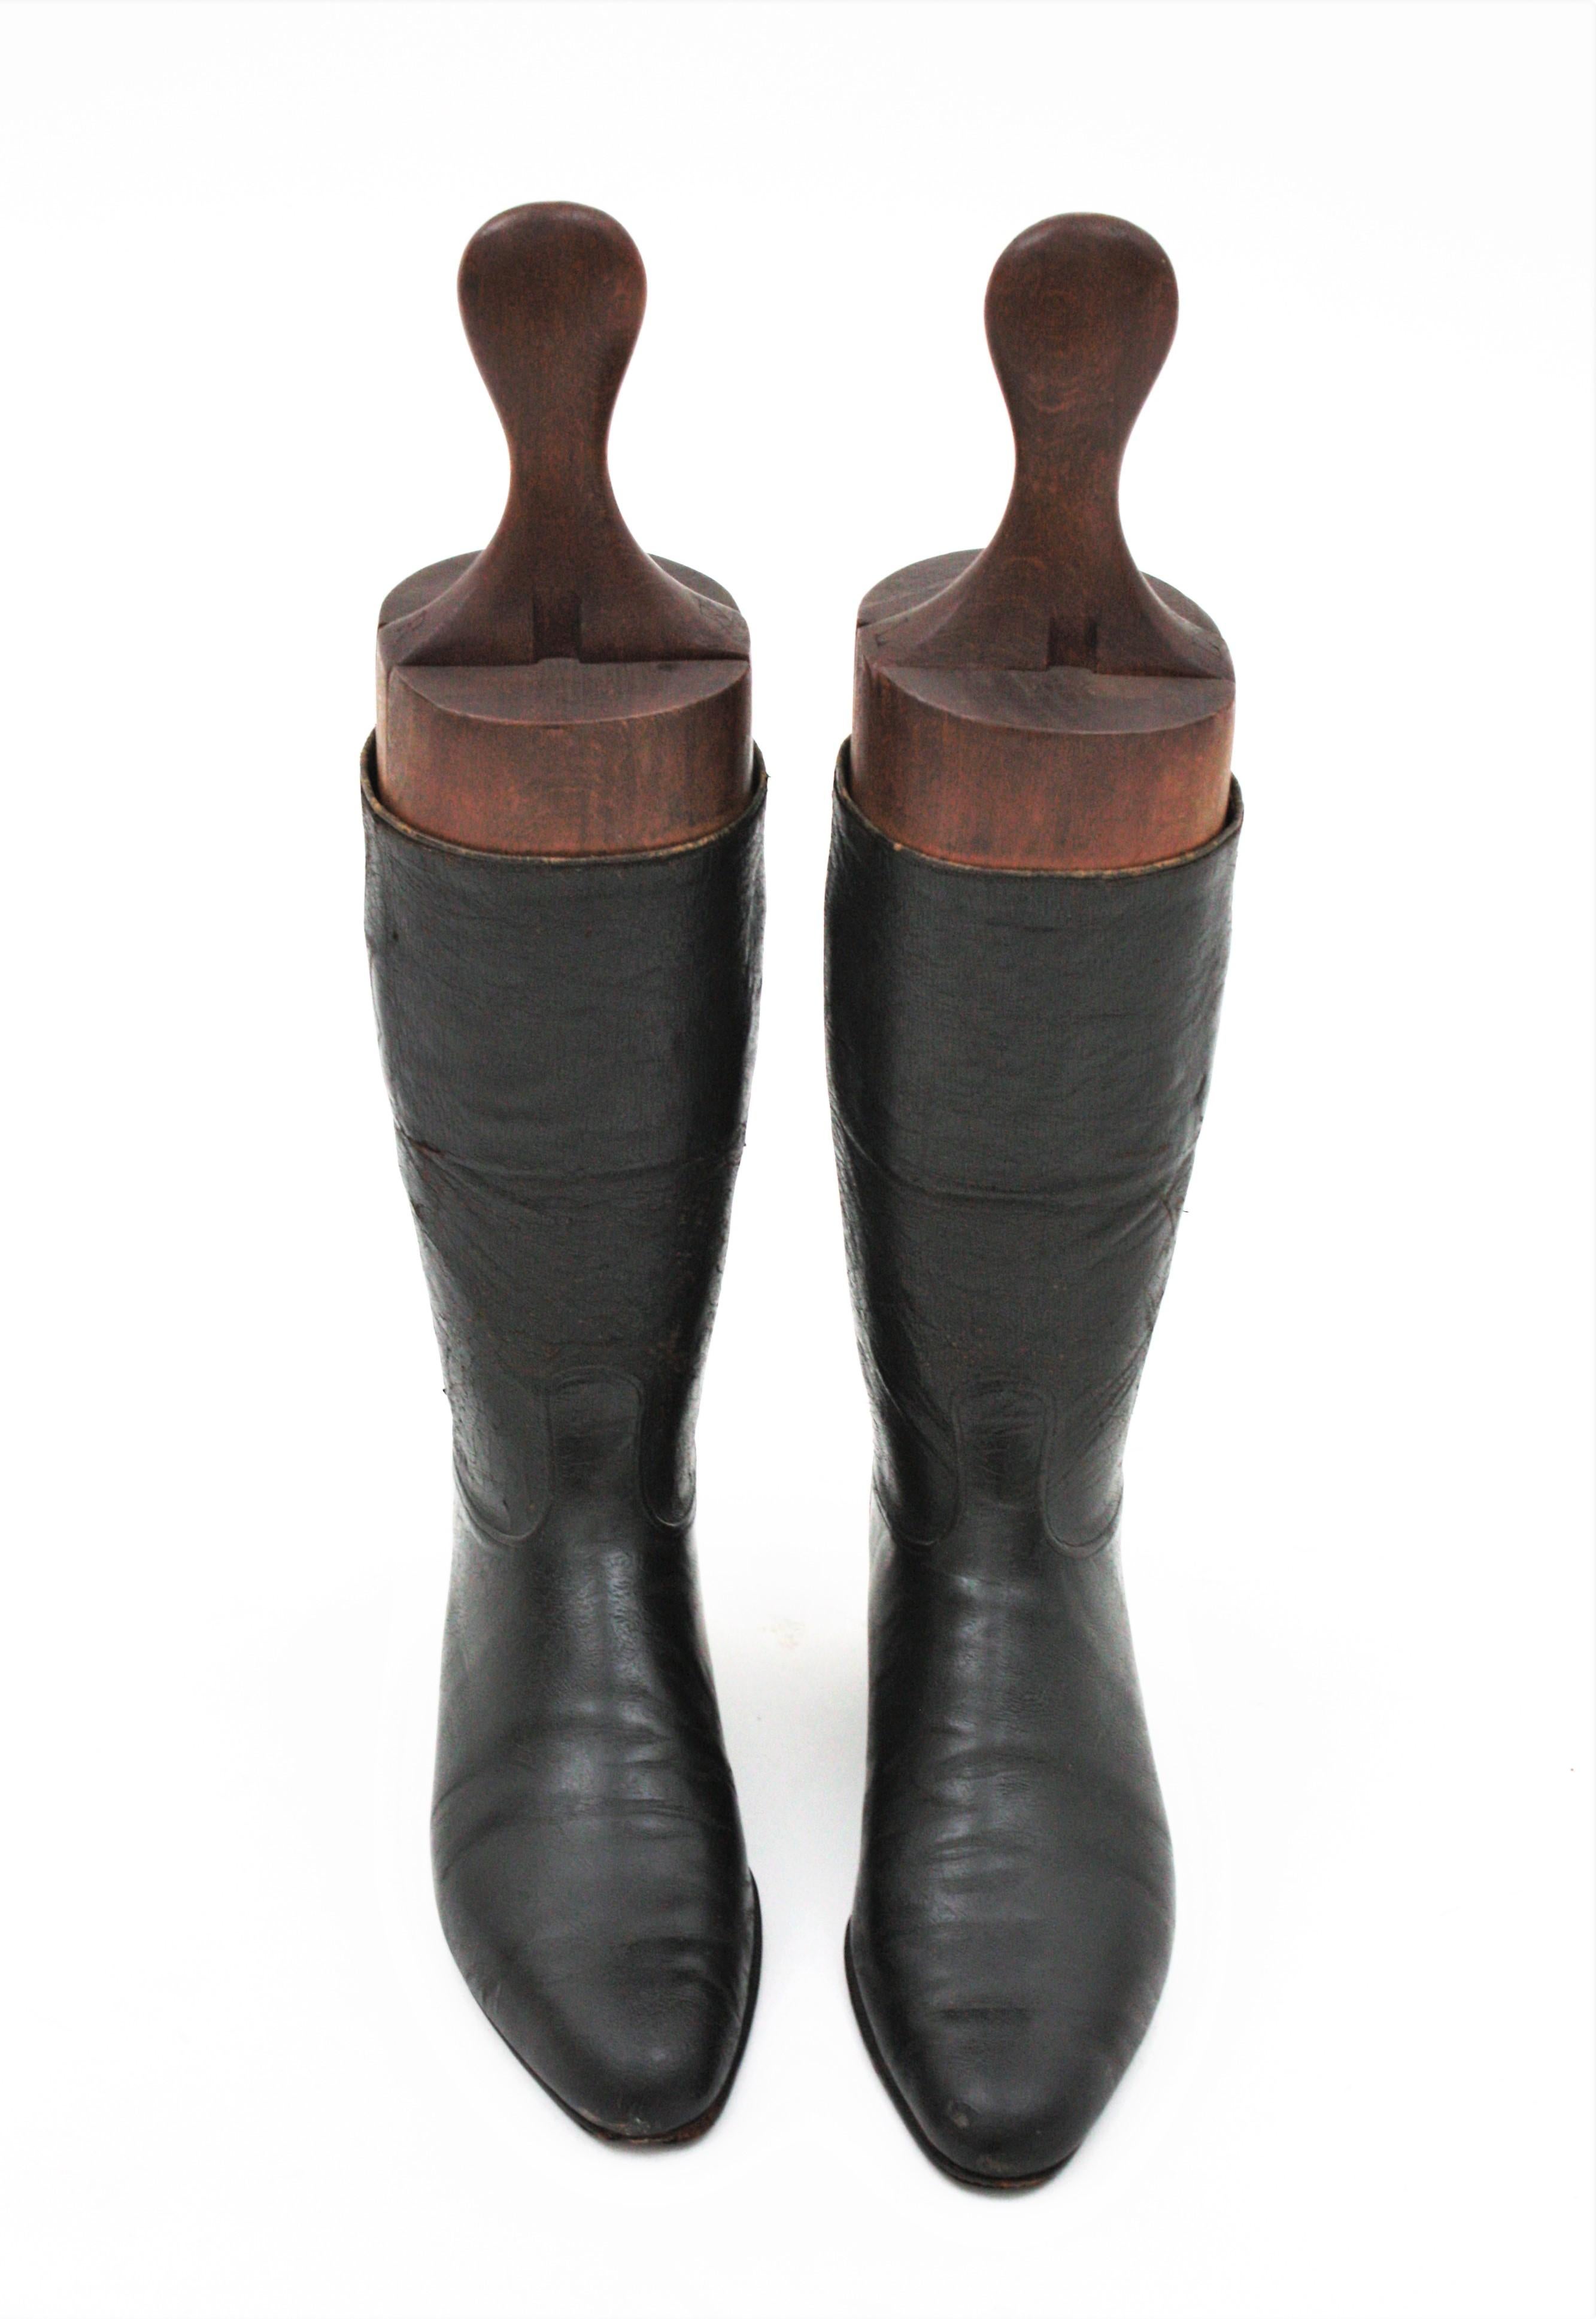 Bespoke Medium Tall Gentleman leather boots. Handcrafted by the shoemaker Poulsen Skone & Co. England, 19th century.
Interesting for collectors or for decorative purposes.
 